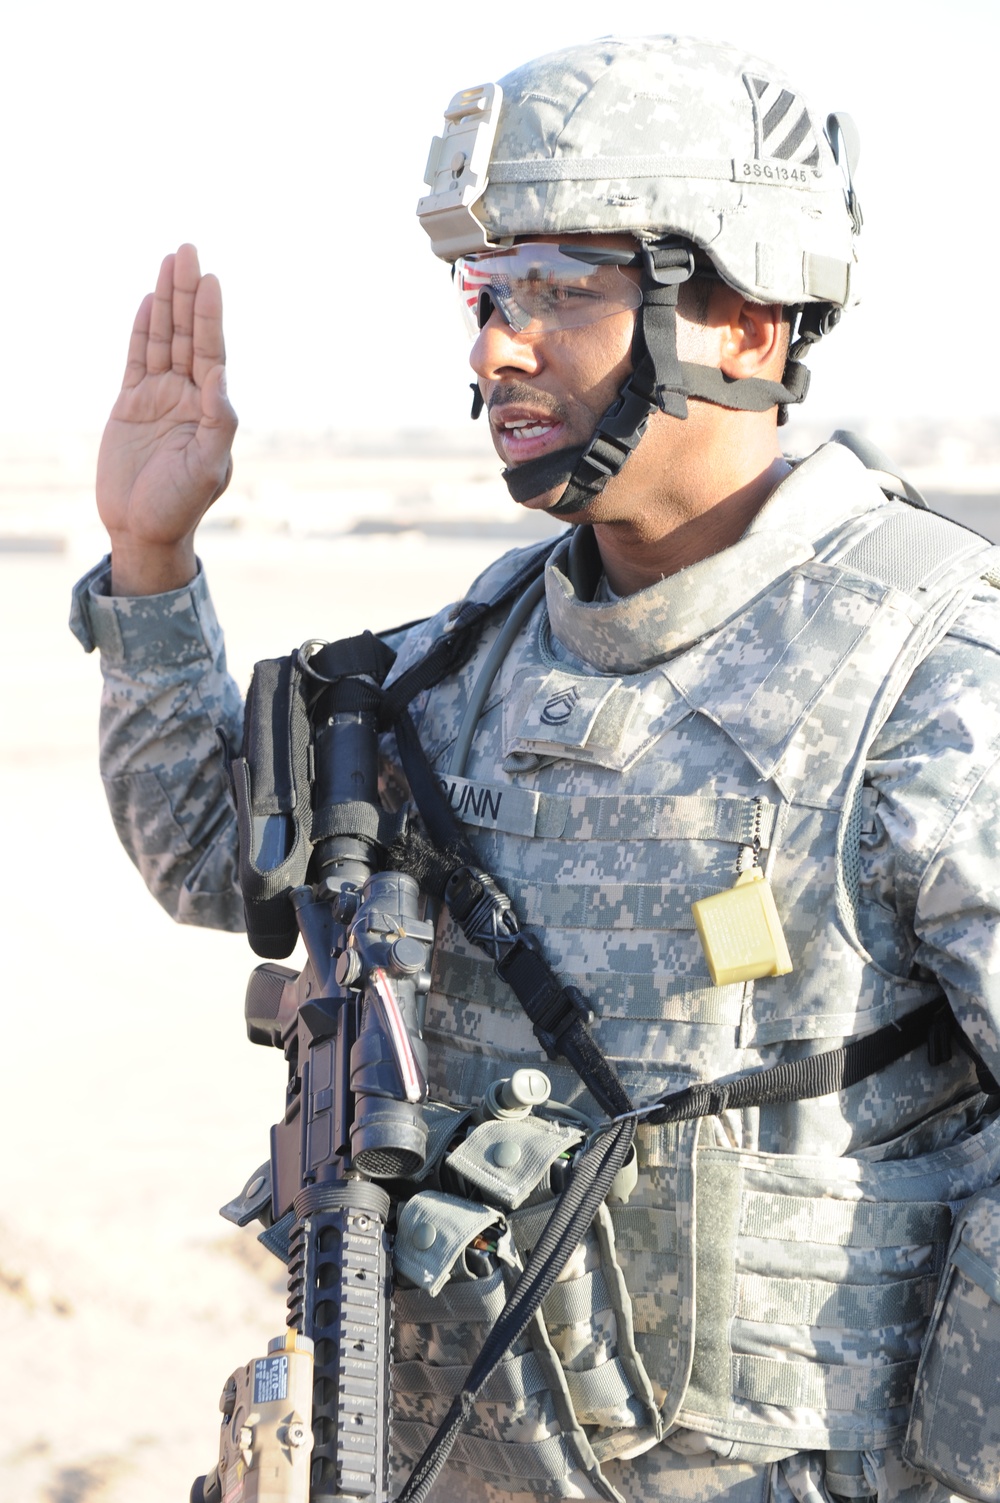 Soldier Re-enlists on Deployment